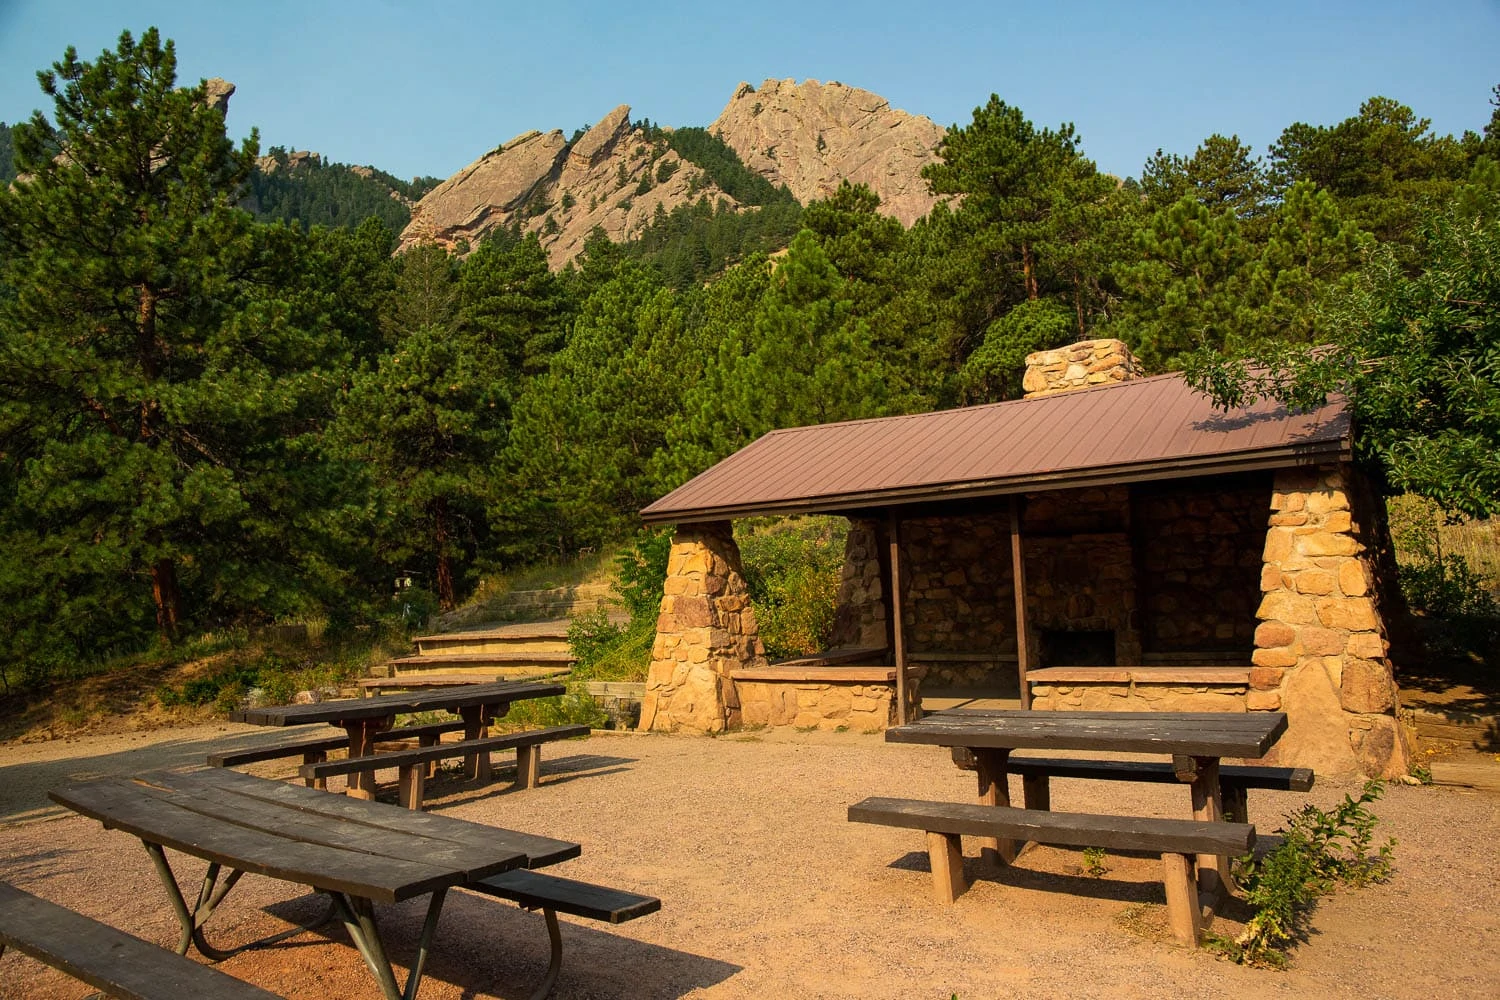 Bluebell shelter is a small reserveable wedding location in chautauqua park in Boulder.